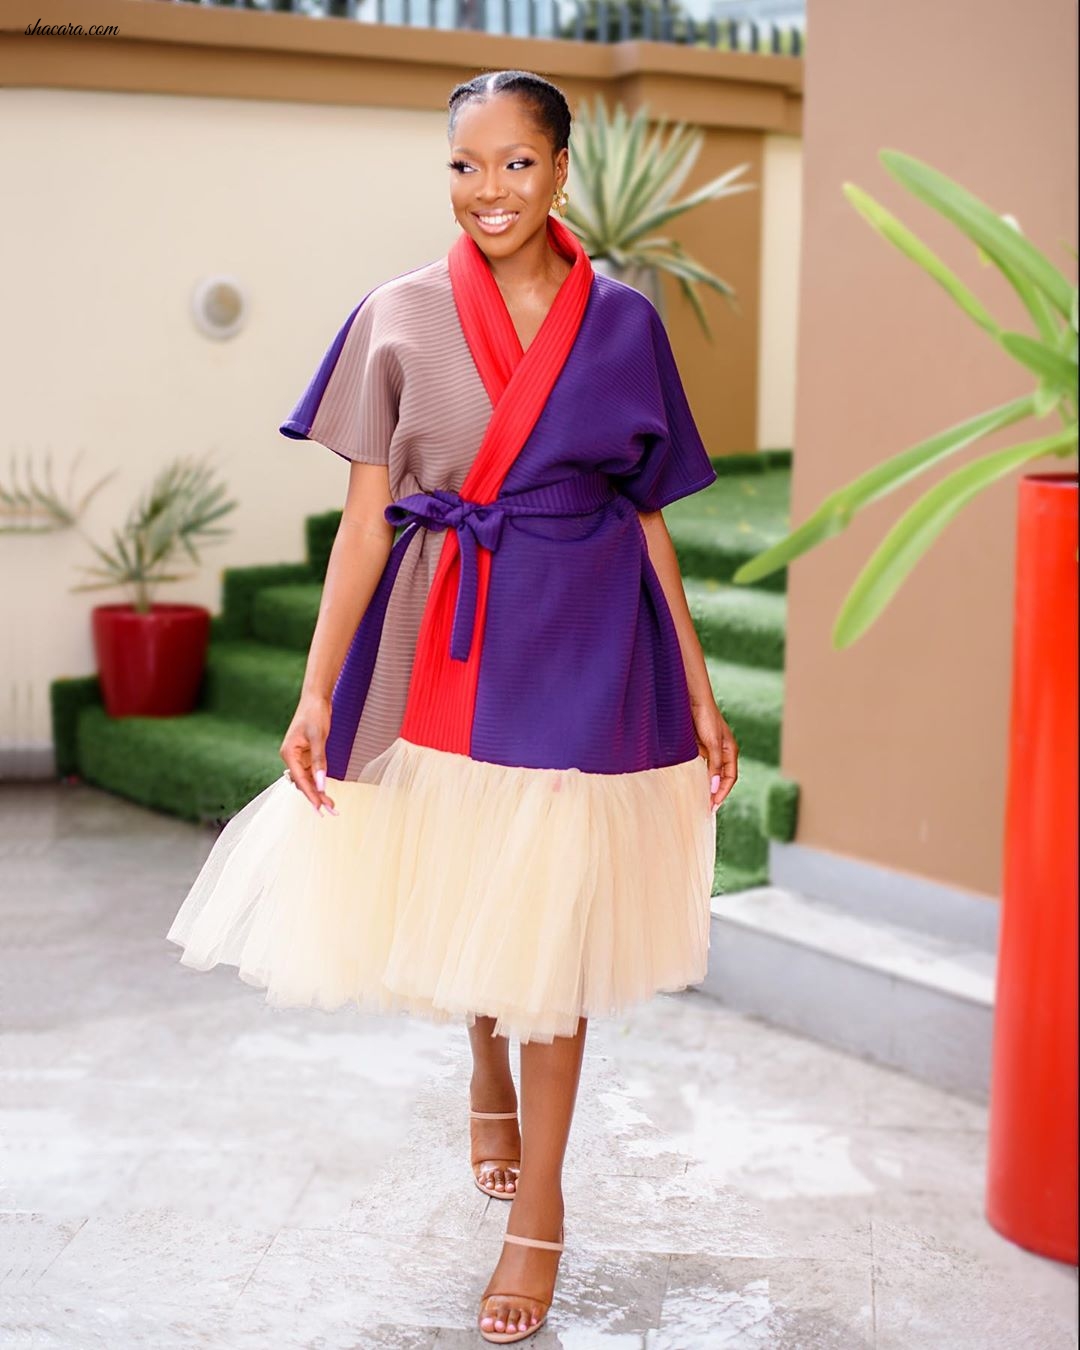 #BBNaija’s Vee’s Style Can Be Summed Up In Two Words: Radiant Chic